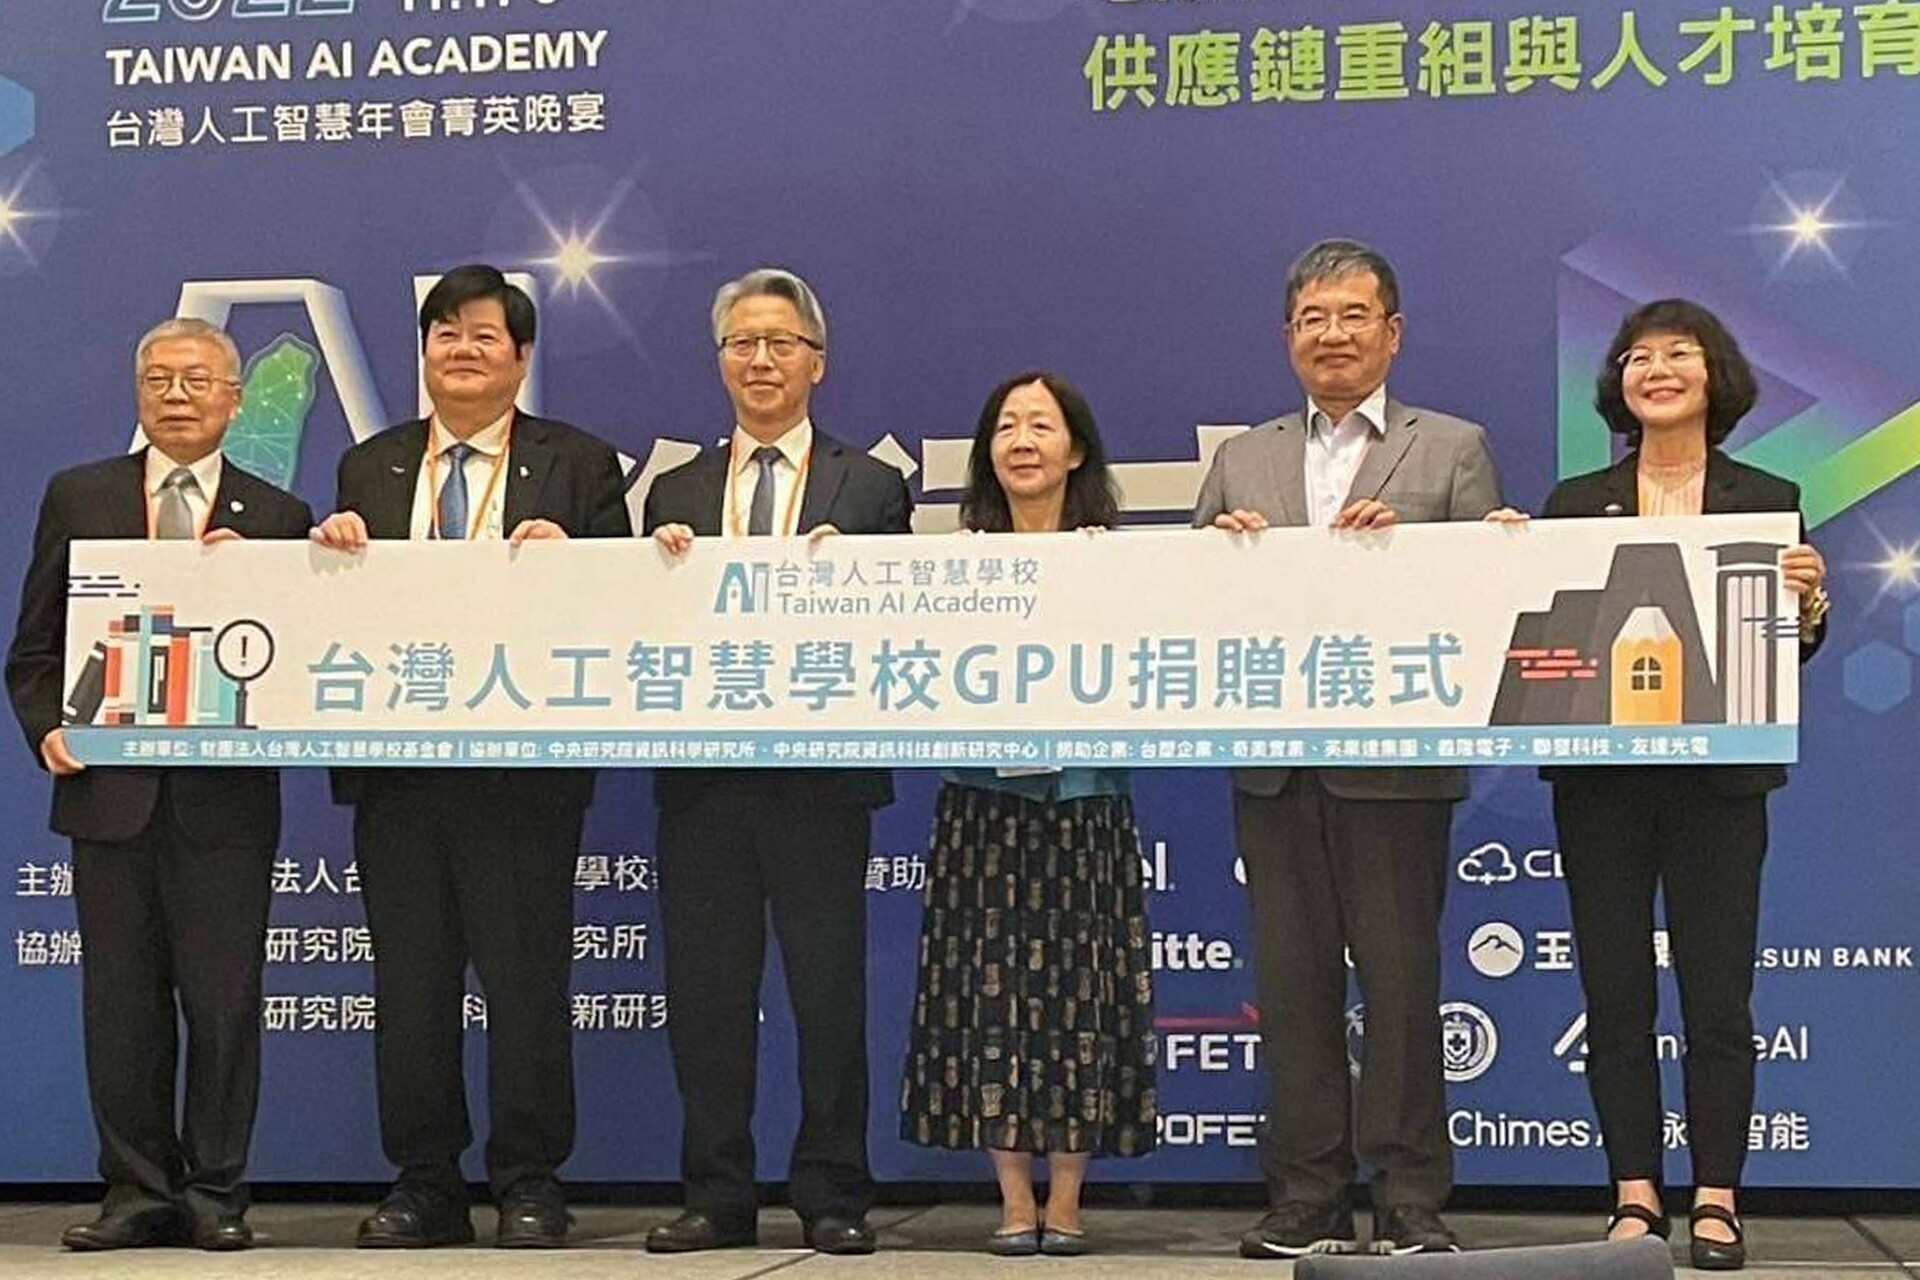 Yueh-Tuan Chen, the President (first person from right hand side) represents NUK to receive GPU from Taiwan AI Academy